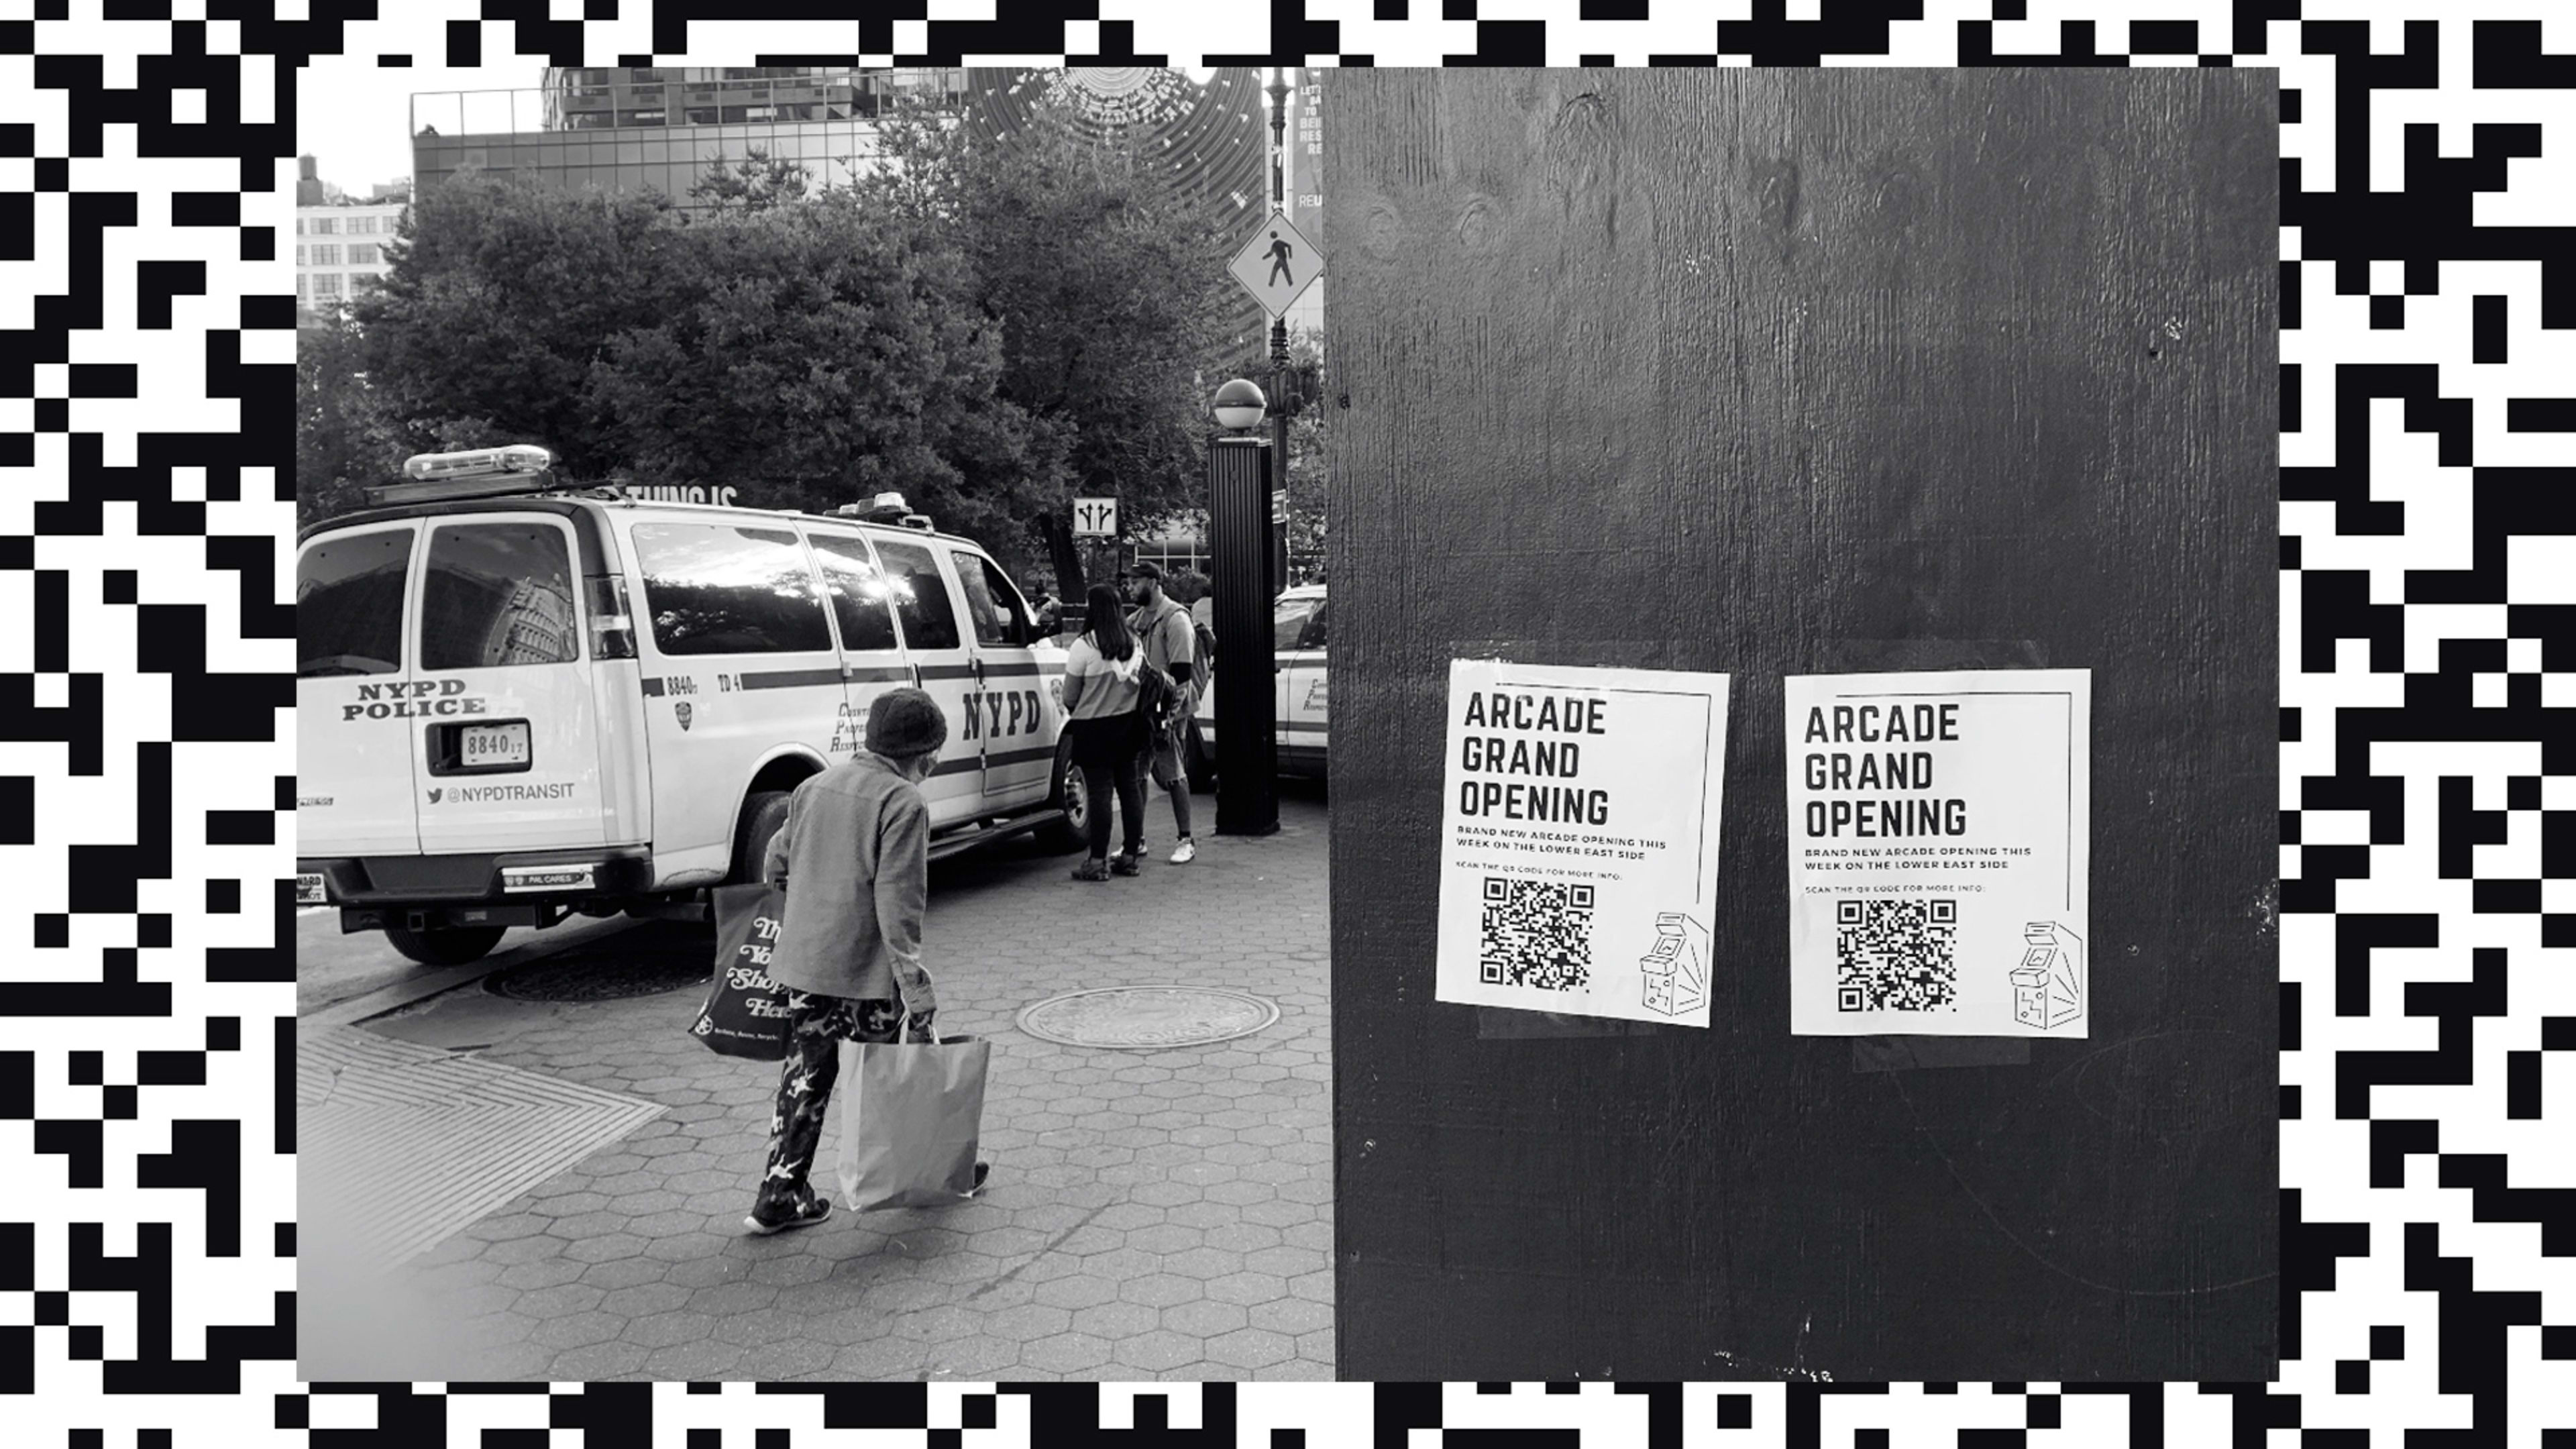 Beware of unknown QR codes—they could contain malware